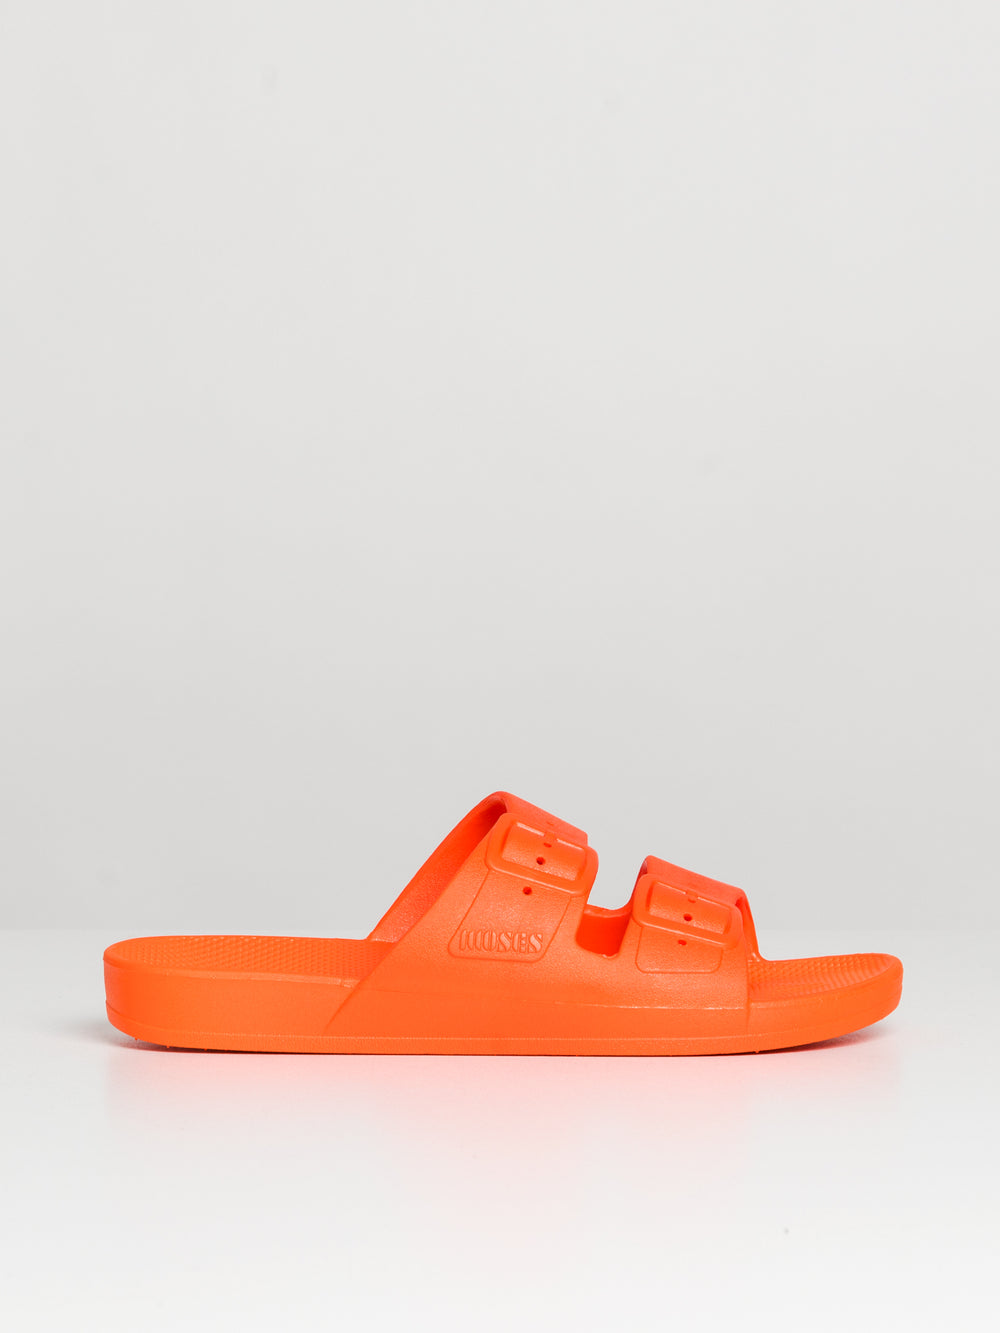 WOMENS FREEDOM MOSES FREEDOM LUCY ORANGE SANDAL - CLEARANCE